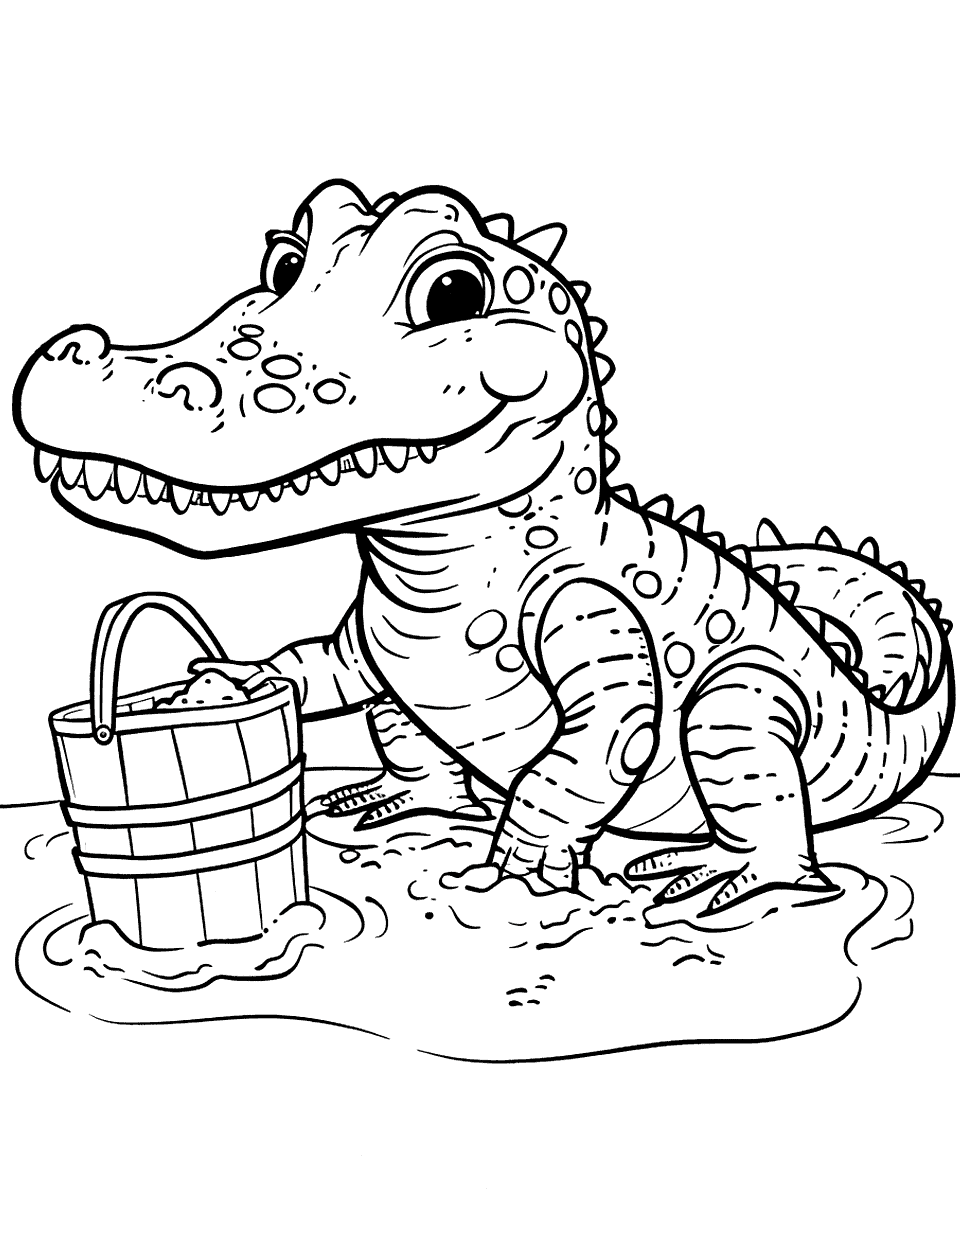 Alligator Building a Sandcastle Coloring Page - An alligator ready to build a sandcastle on the beach with a bucket.